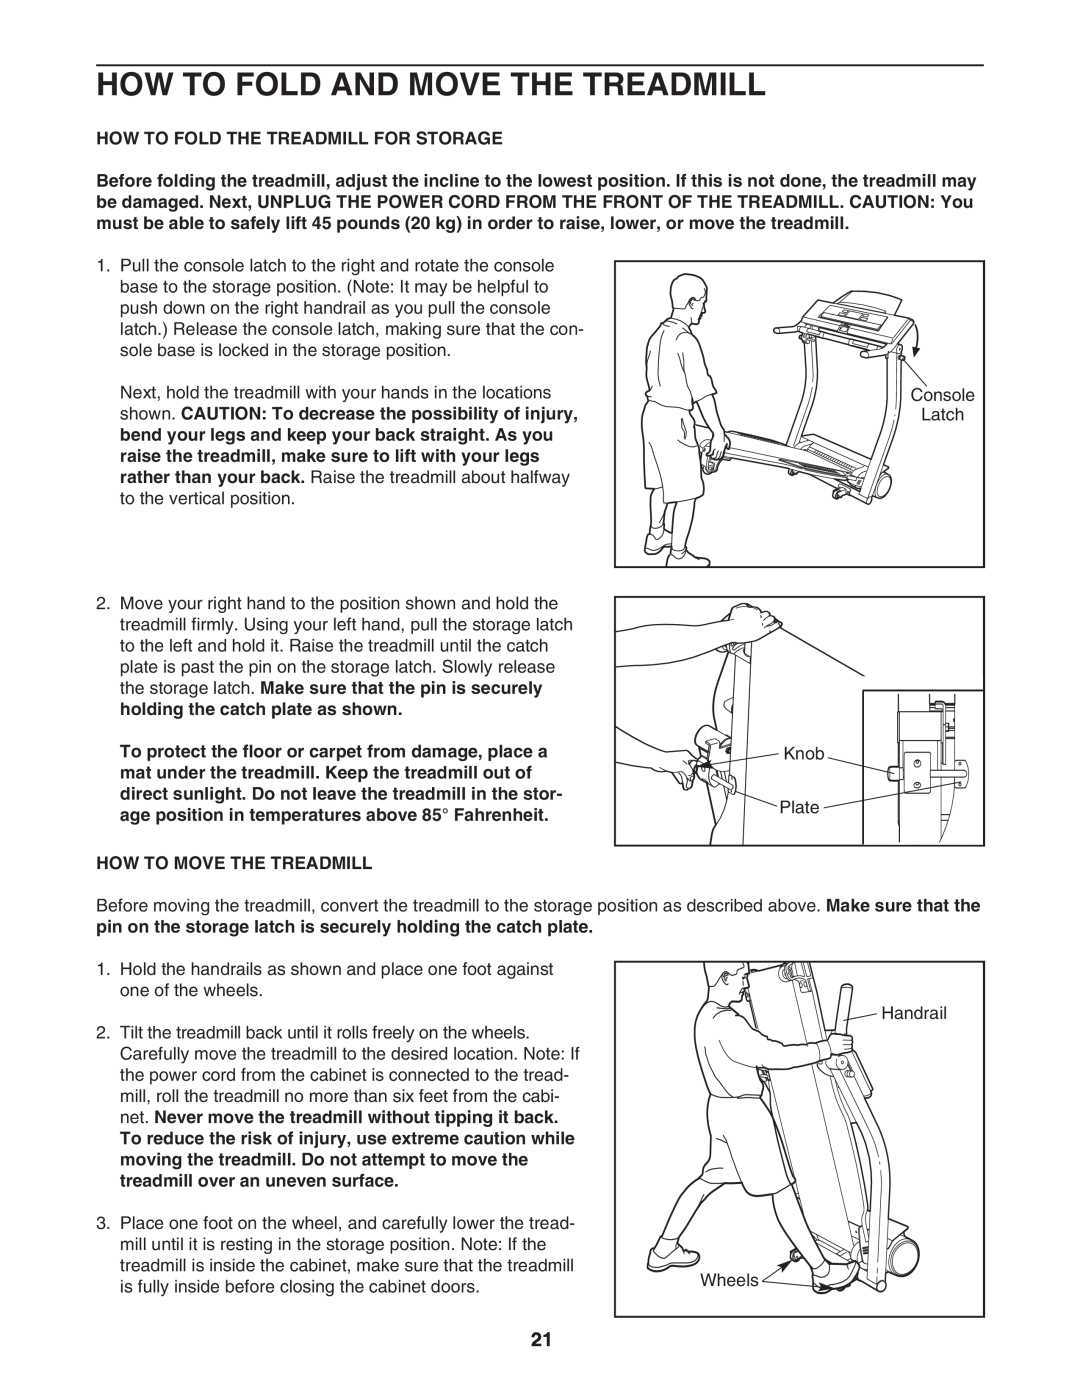 ProForm HGTL09111M How To Fold And Move The Treadmill, How To Fold The Treadmill For Storage, How To Move The Treadmill 